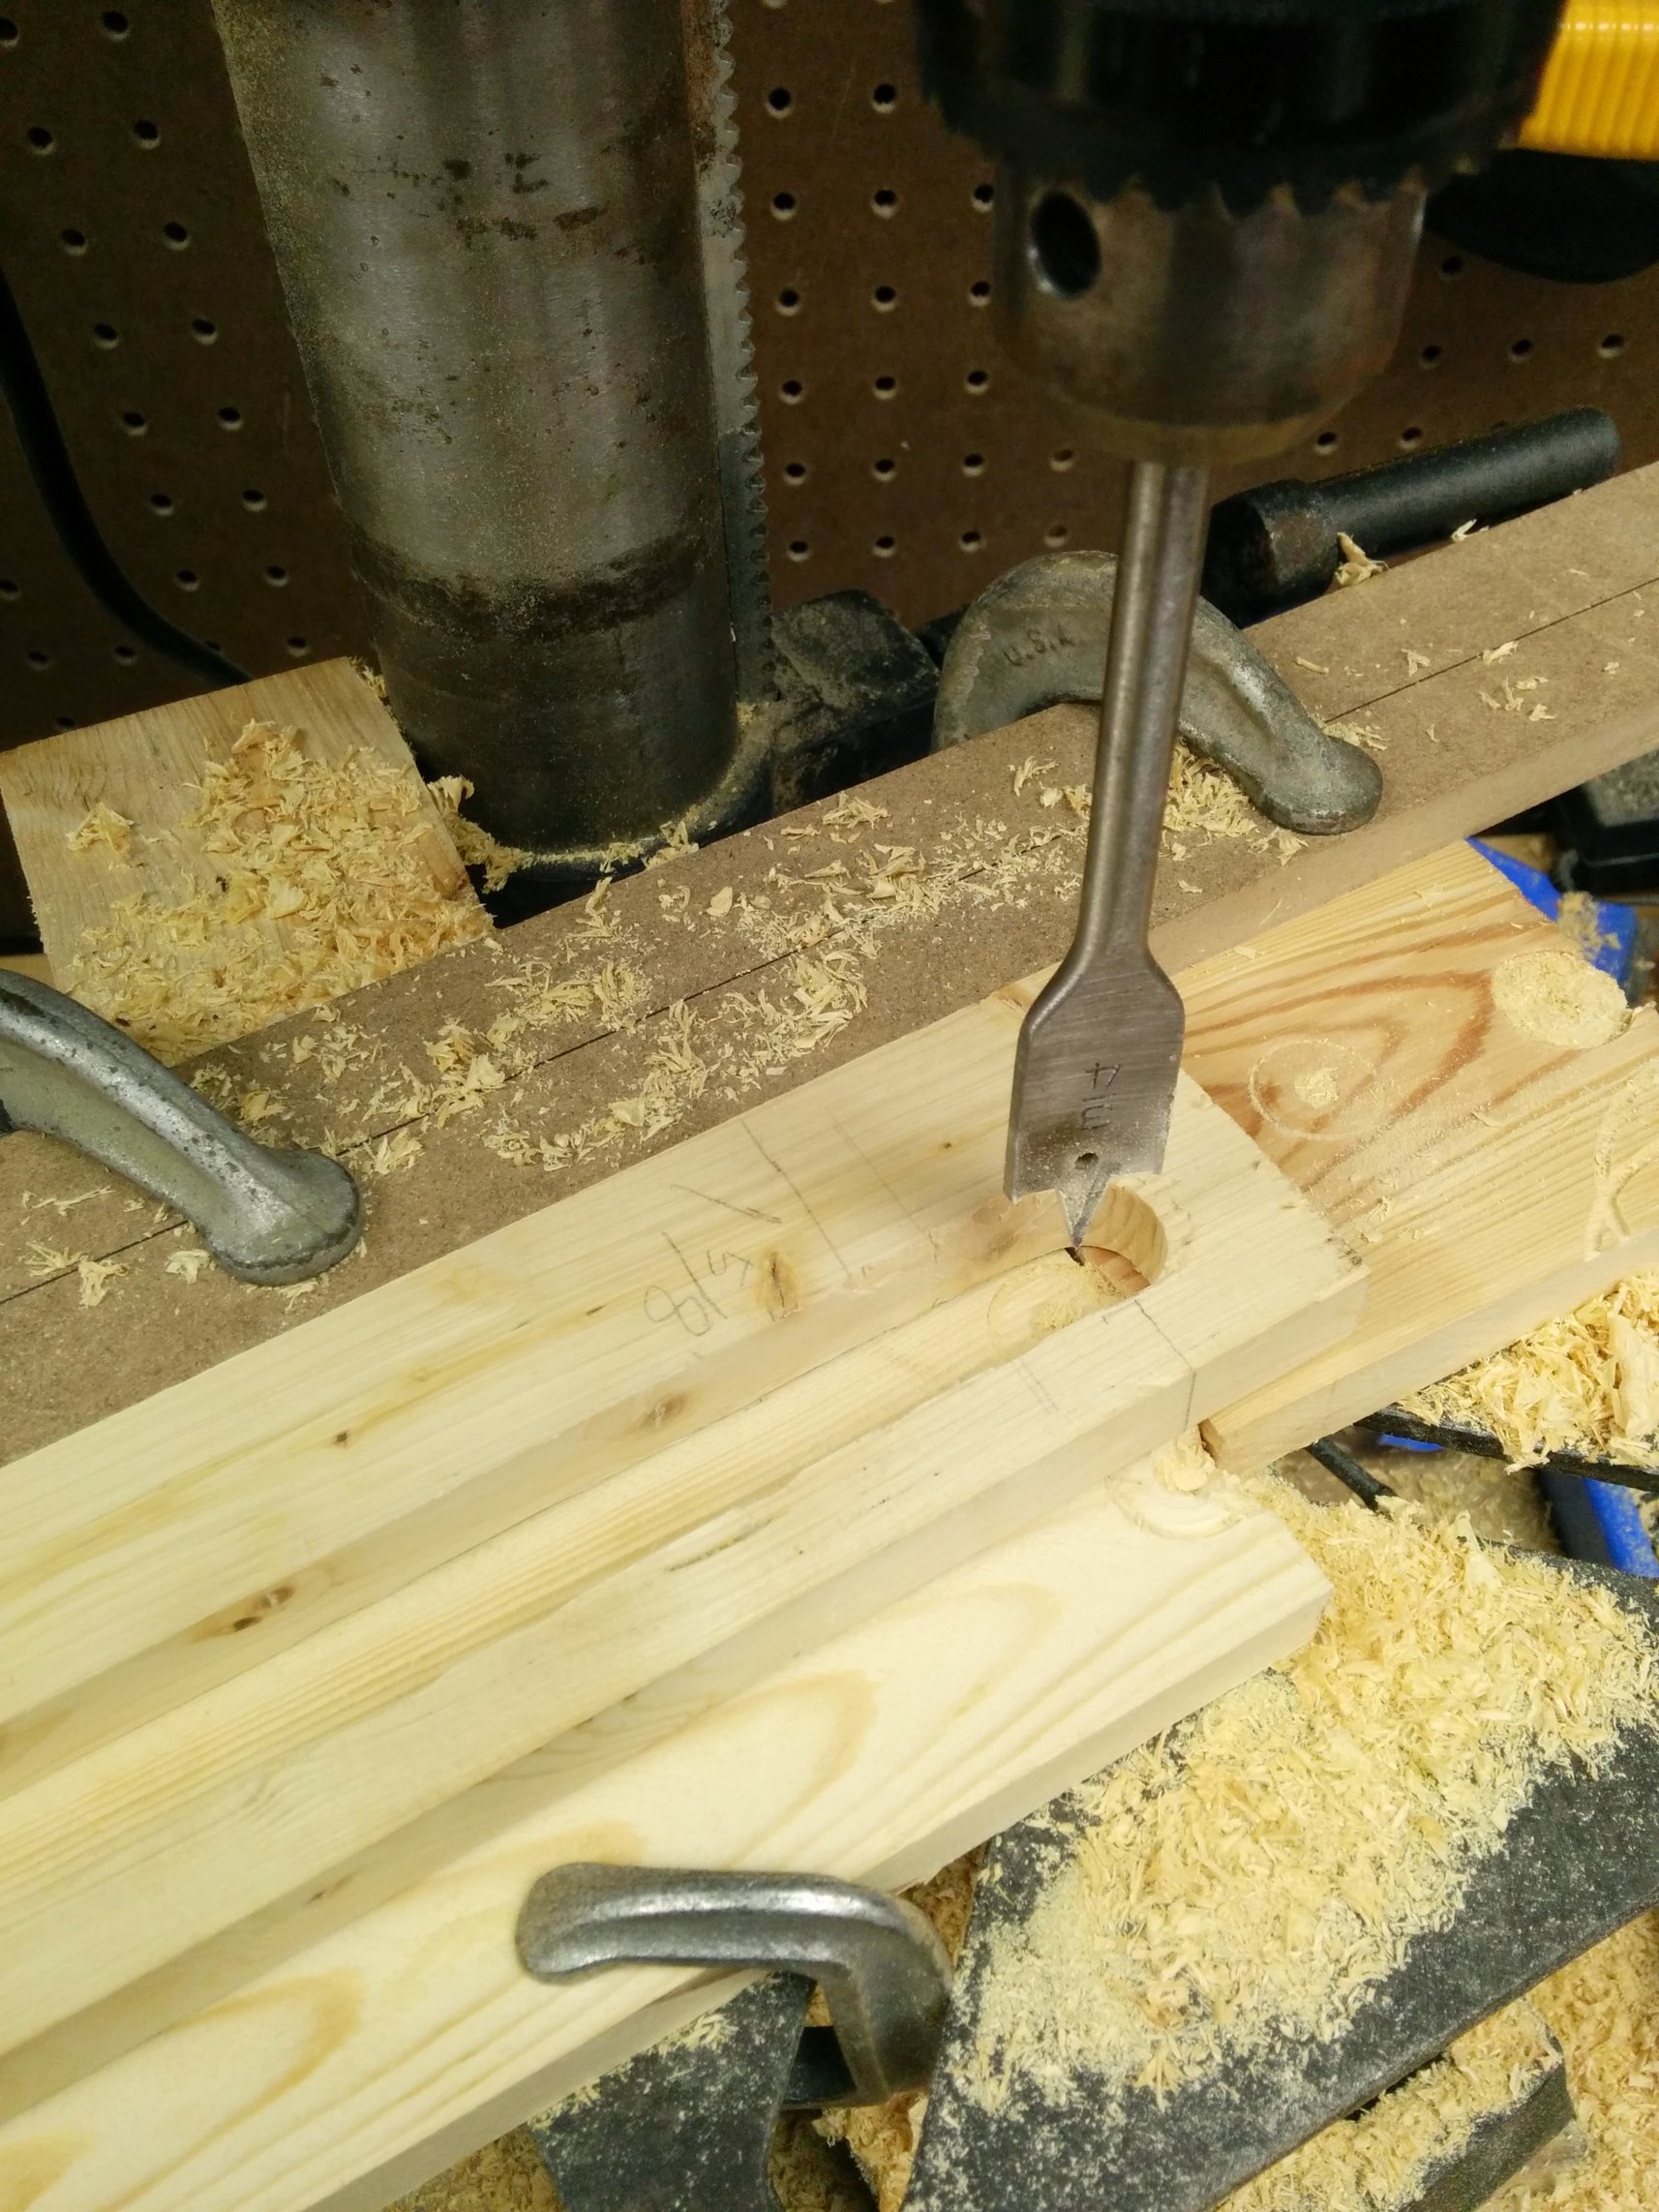 Started by drilling 3/4" holes, holes to match my 3/4" dowels in the scissors. 